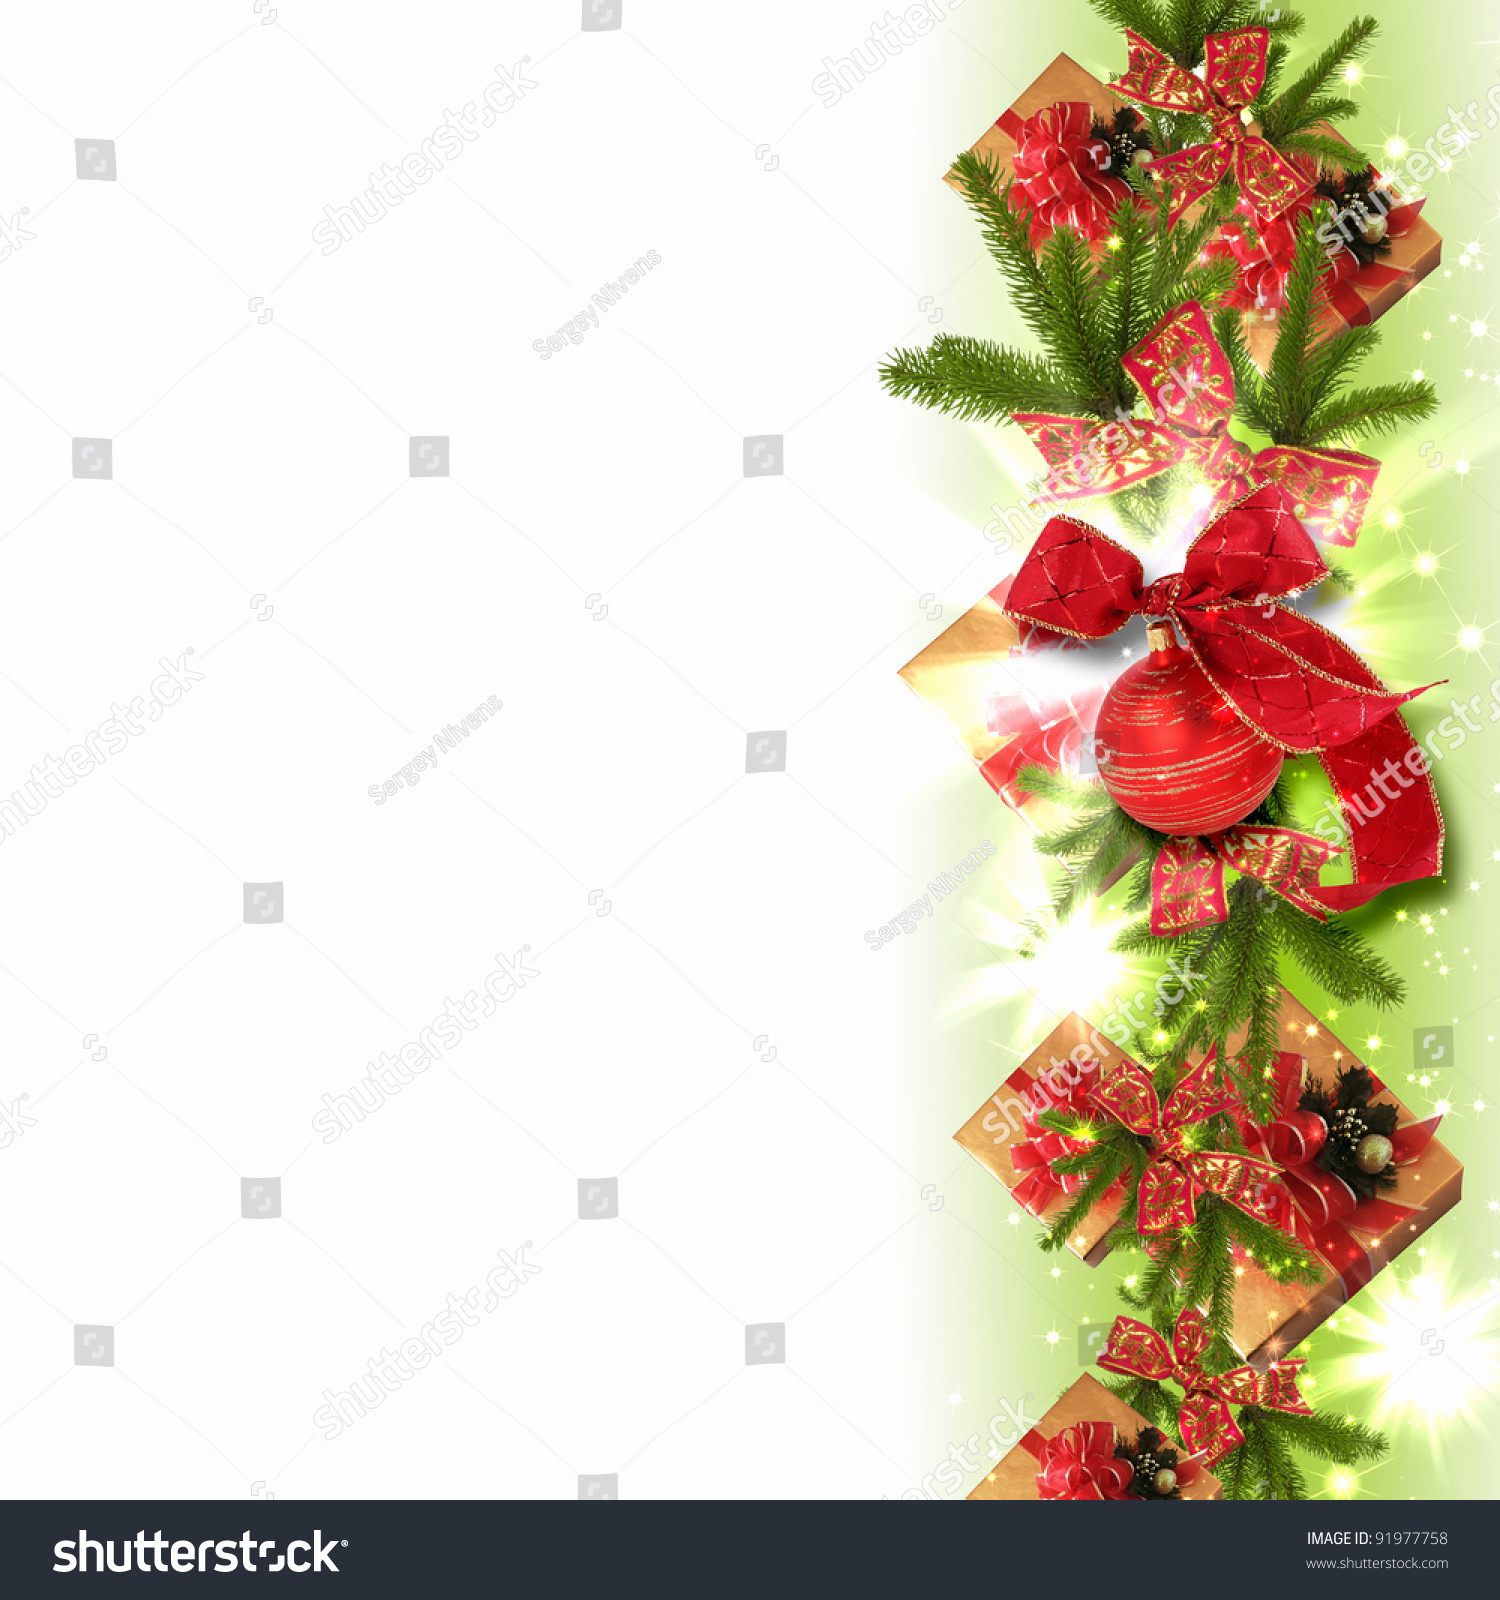 Illustration of background with traditional Christmas decoration ornament #91977758